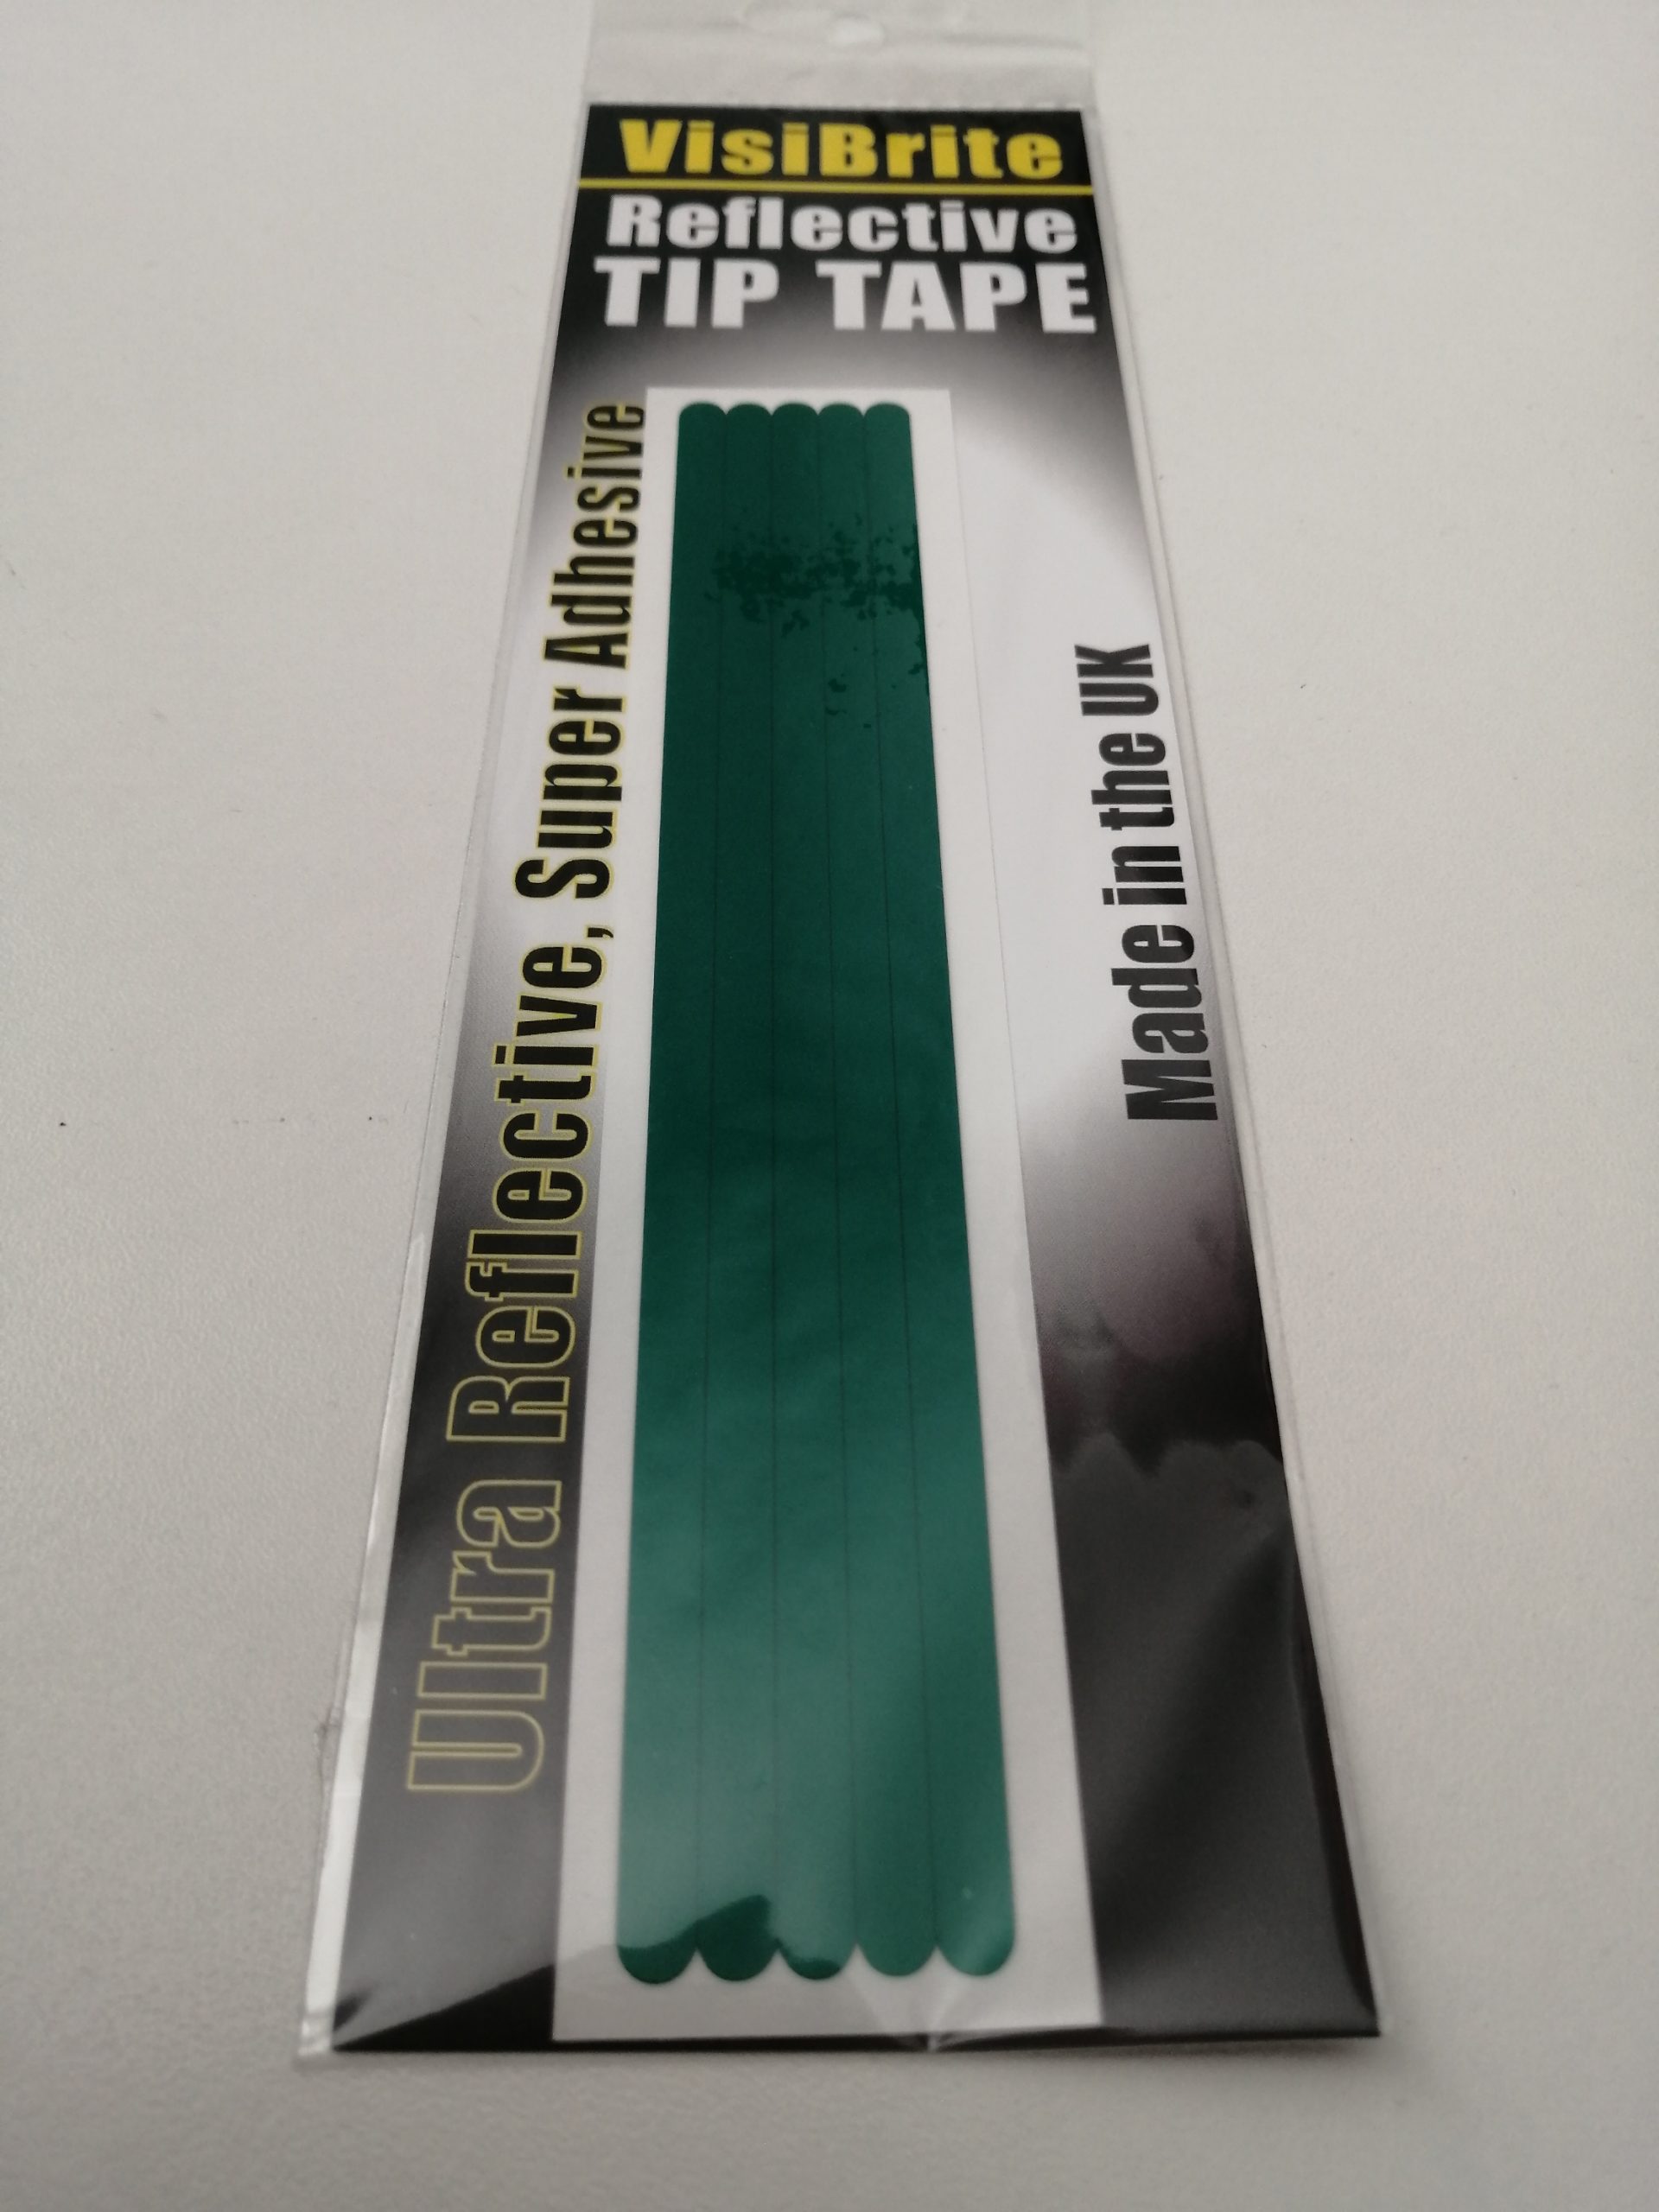 VisiBrite Reflective Tip Tape – Rutherford's Angling Ltd